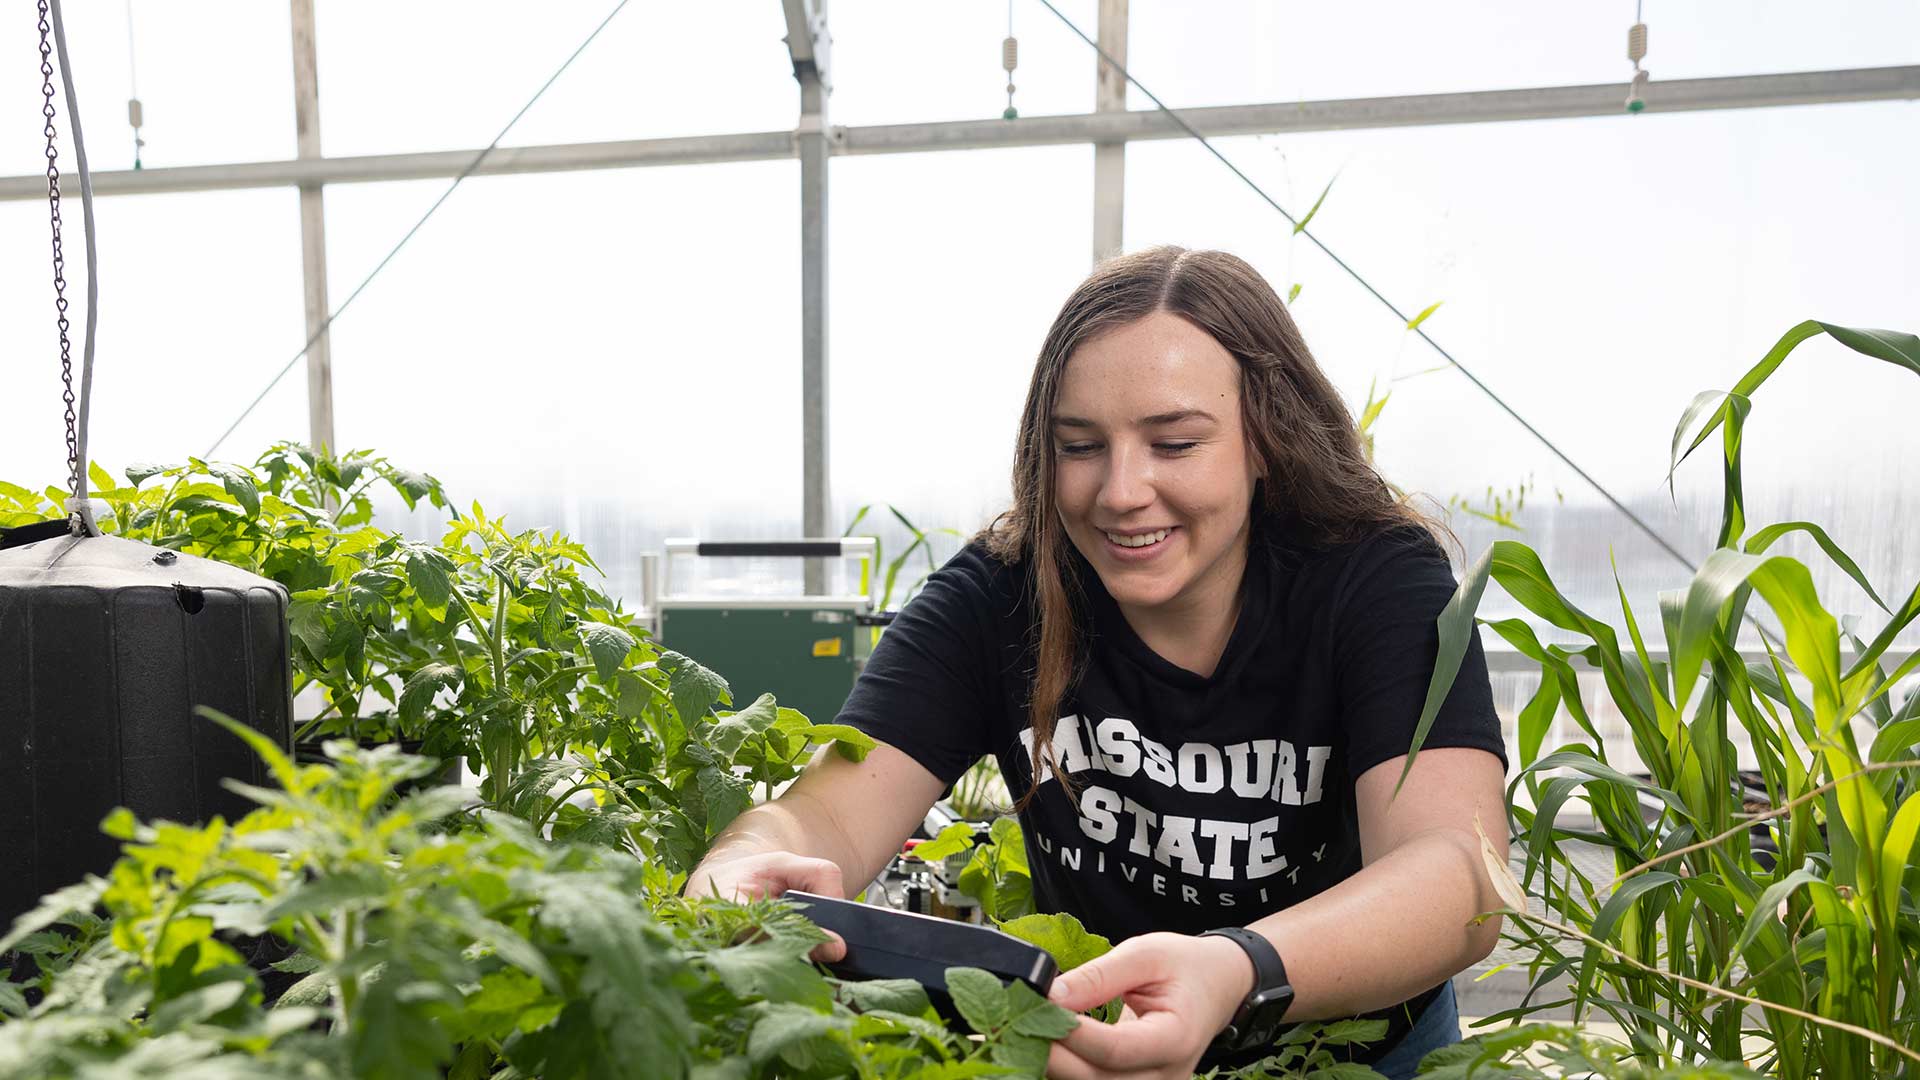 A biology graduate student handles plants in a greenhouse.